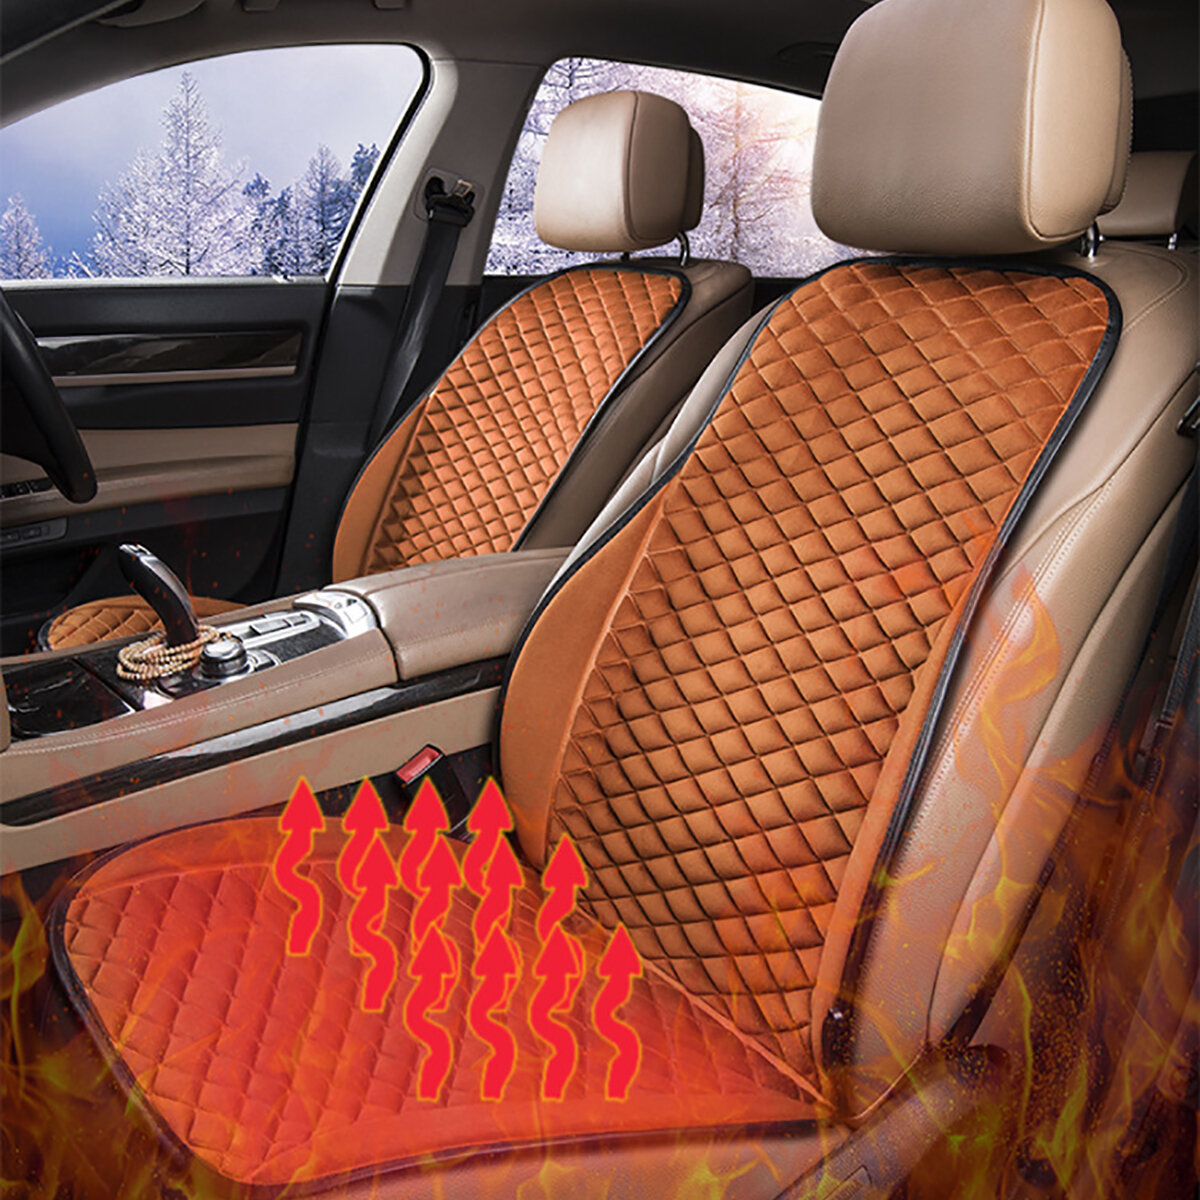 Universal 12V Car Seat Pad Cushion Cover Heating Chair Heater Pad Temperature